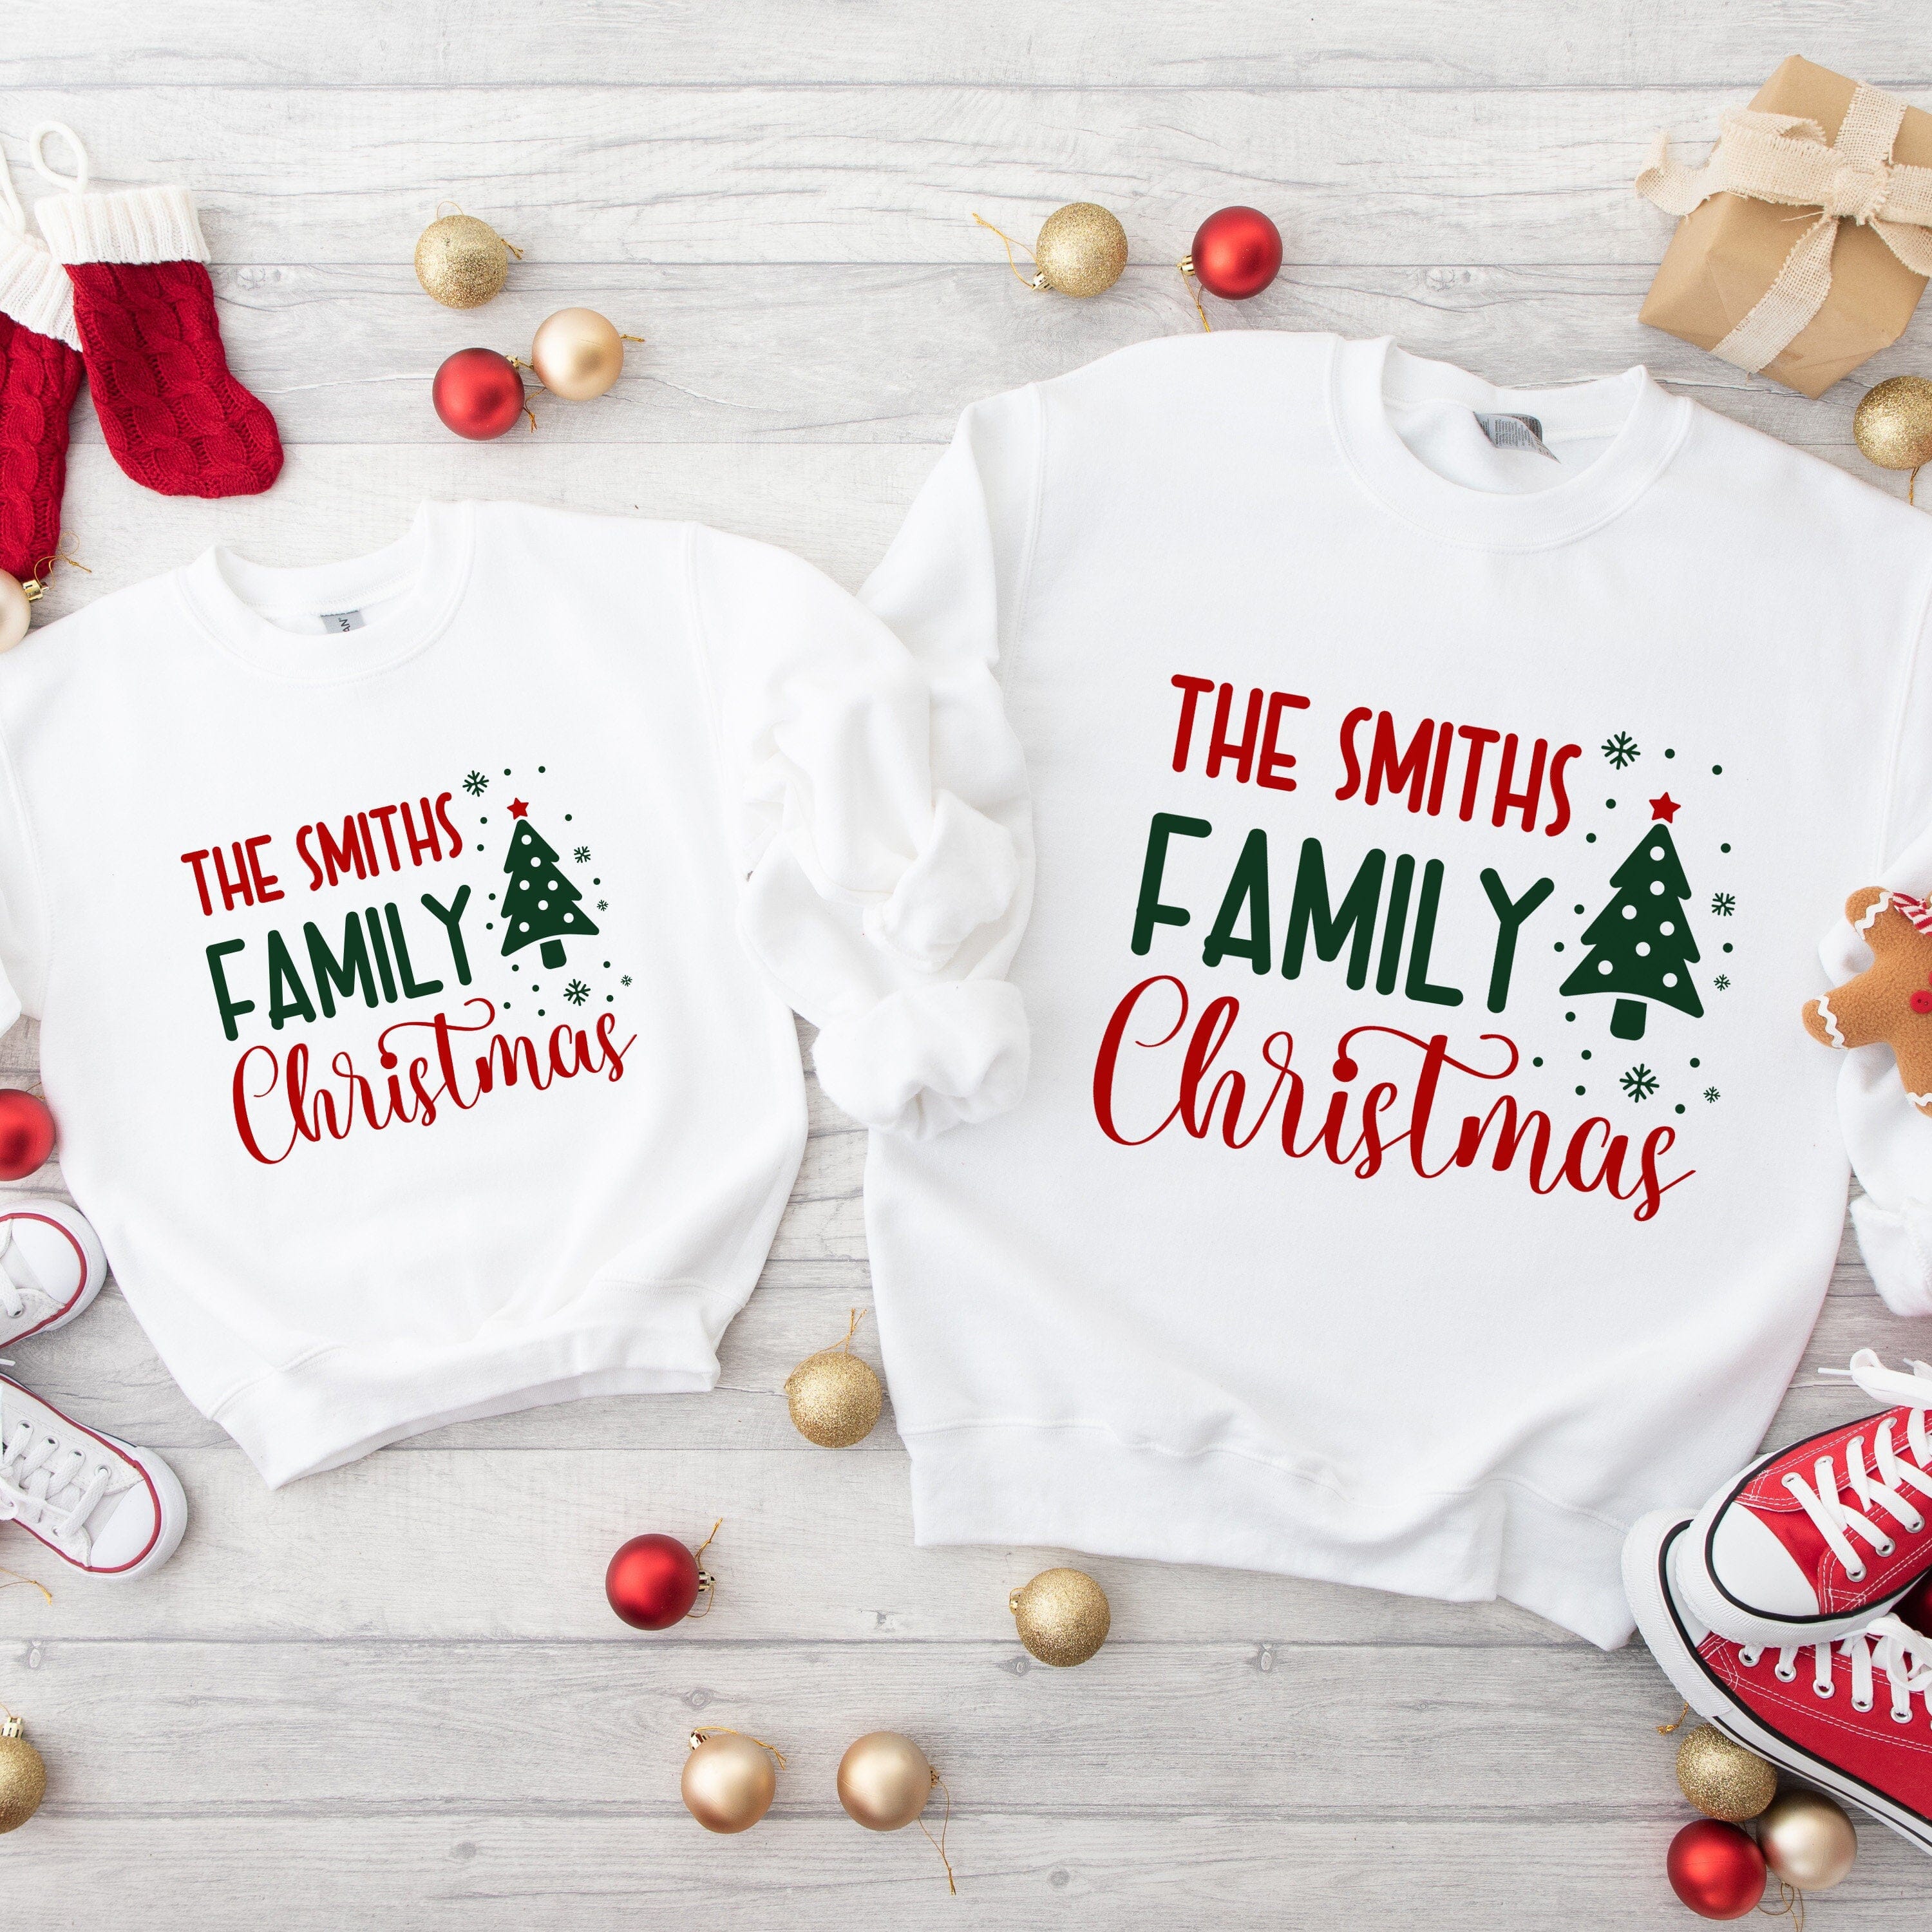 Personalised Family Christmas Jumper With Names, Matching Sweatshirt With Christmas Tree Design